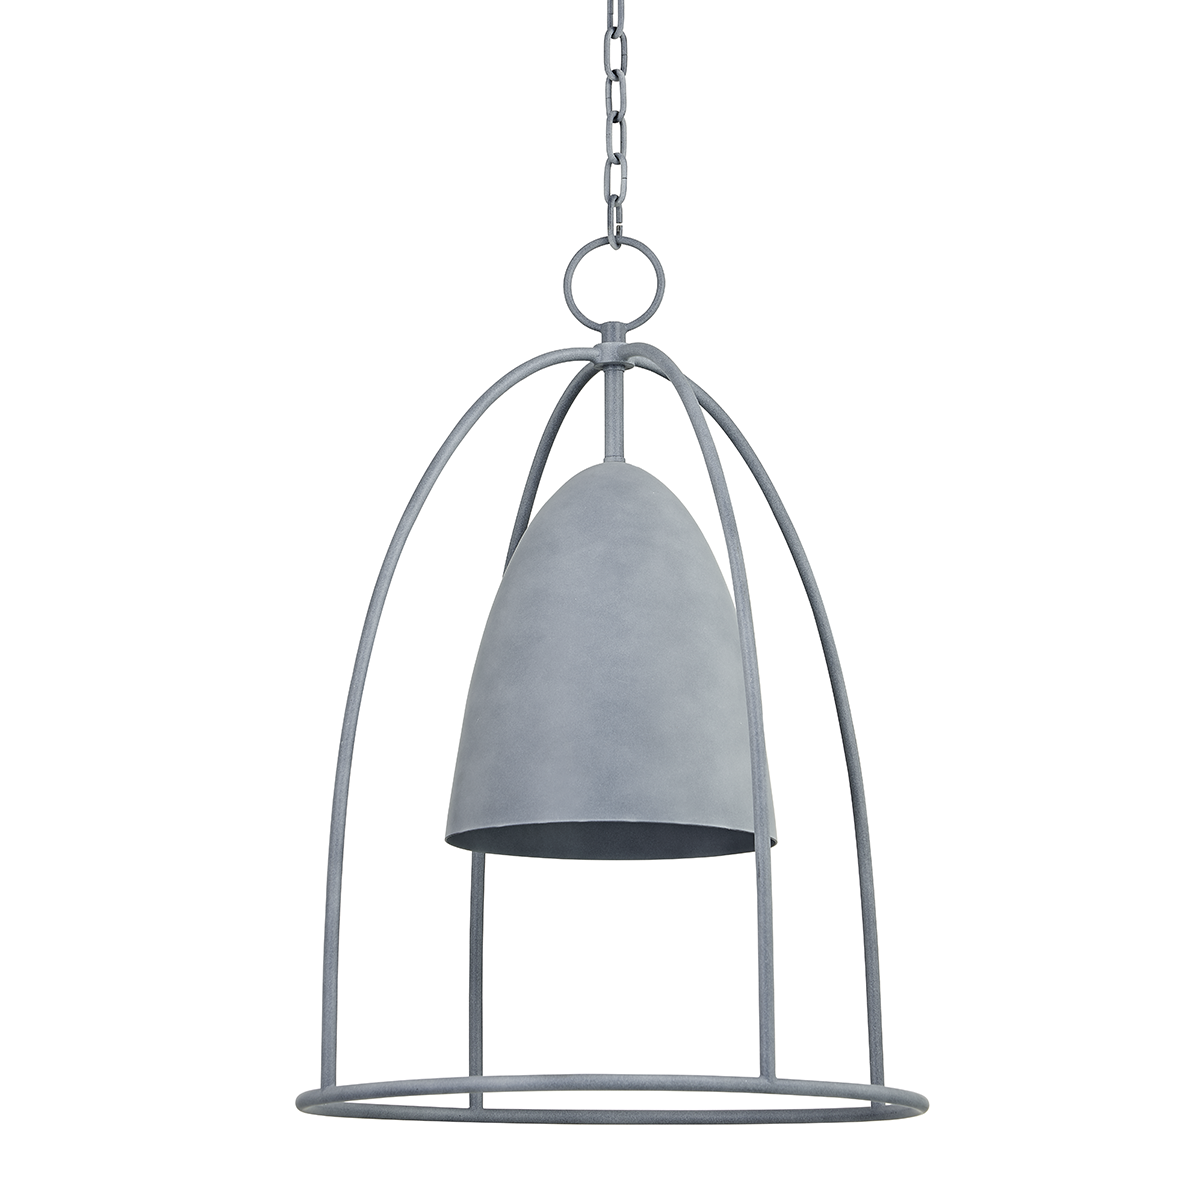 Troy WISTERIA 1 LIGHT LARGE EXTERIOR LANTERN F1125 Outdoor l Wall Troy Lighting WEATHERED ZINC  